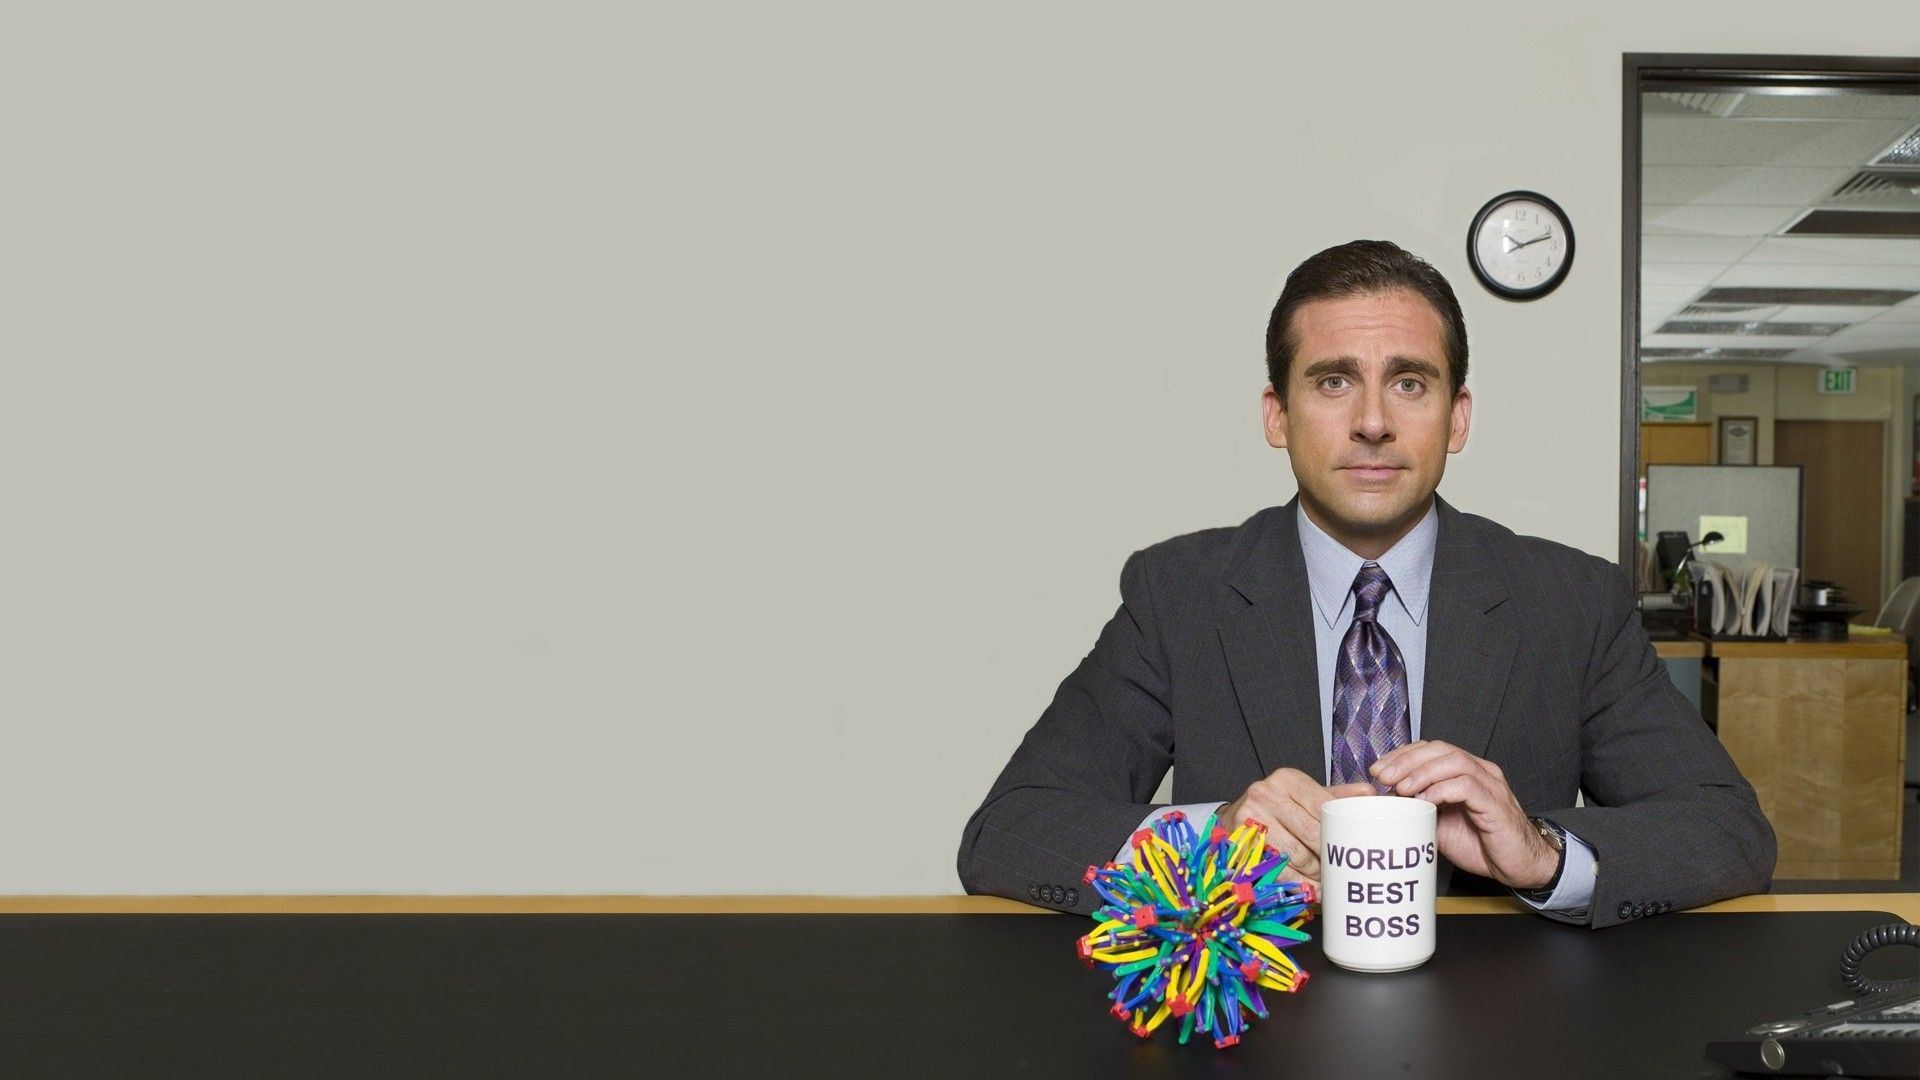 Michael Scott sitting at a desk with a coffee mug that says 